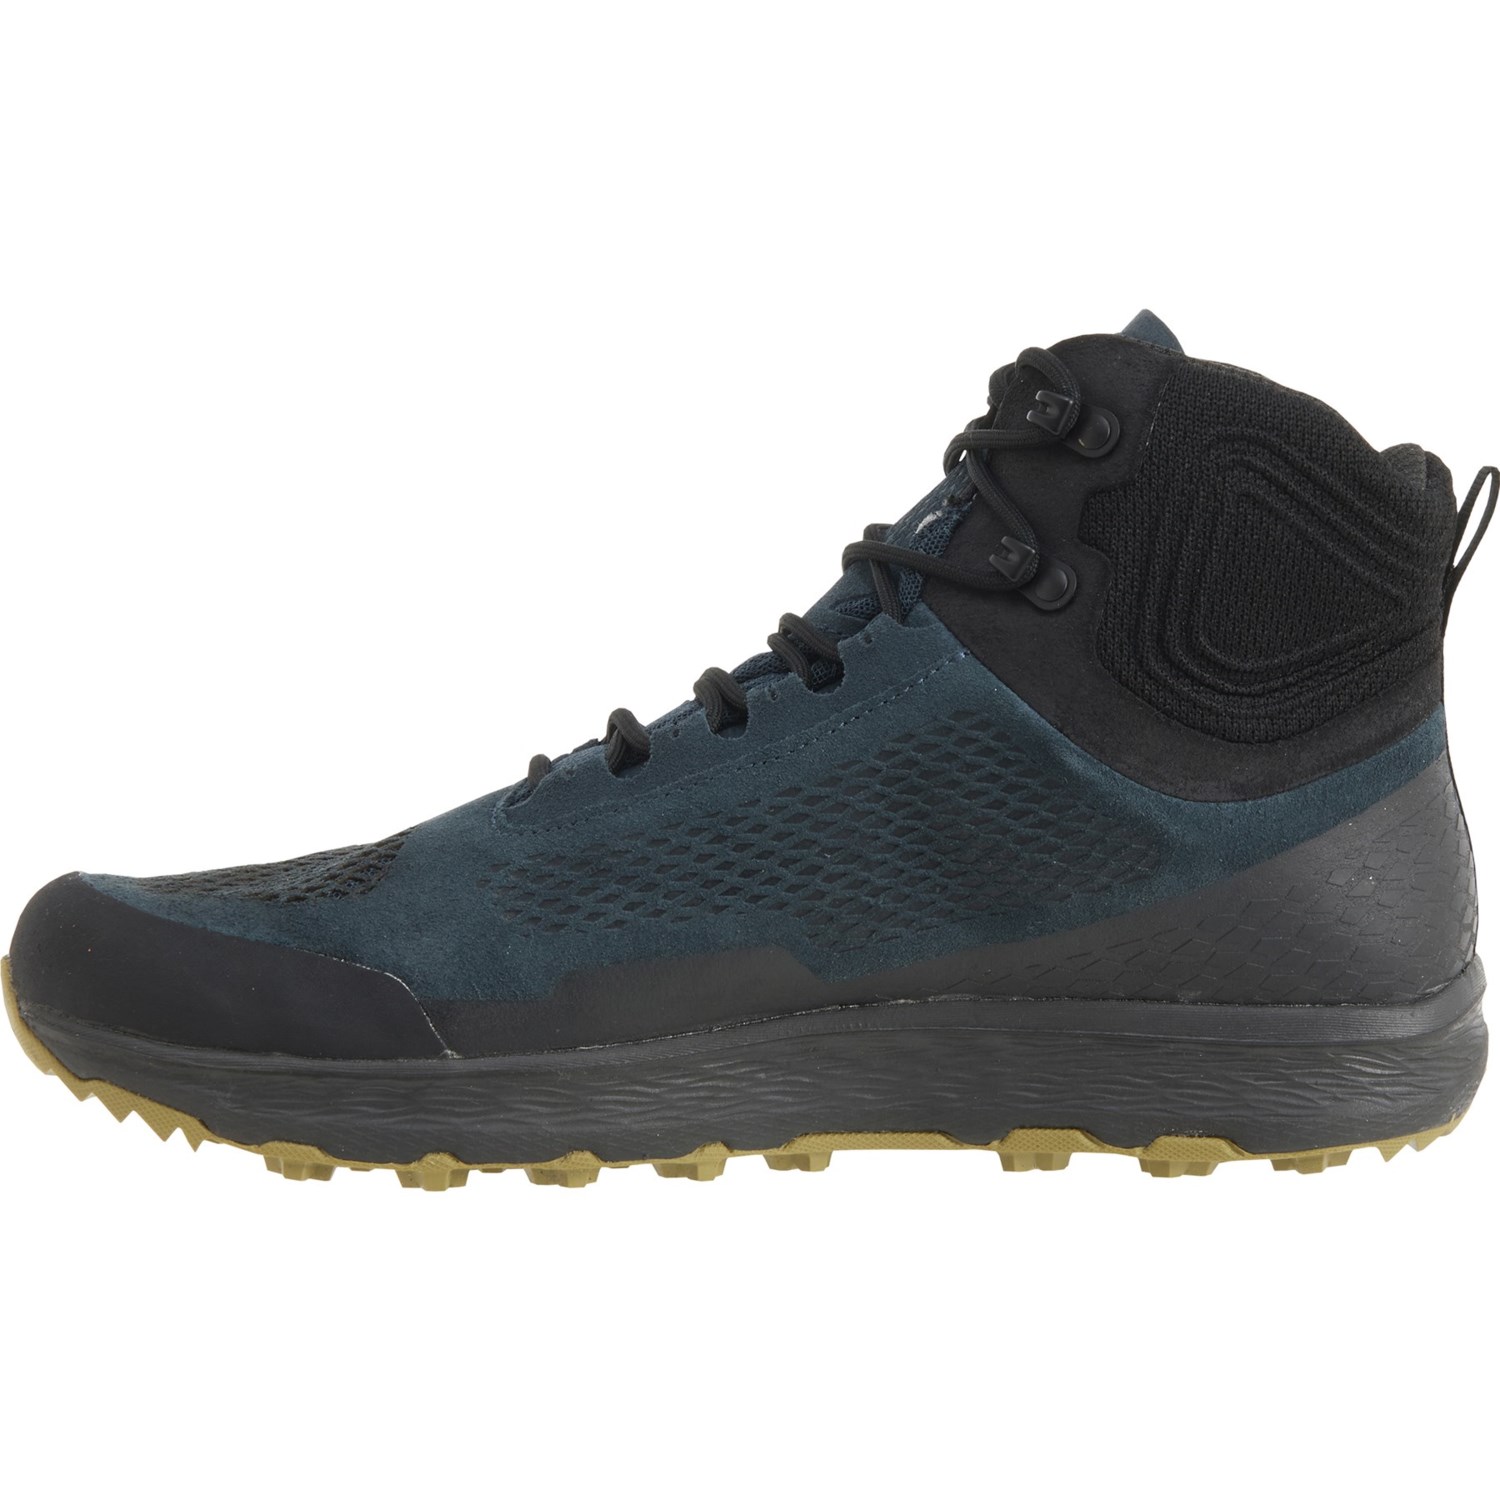 Vasque Breeze LT NTX Mid Hiking Boots (For Men) - Save 42%